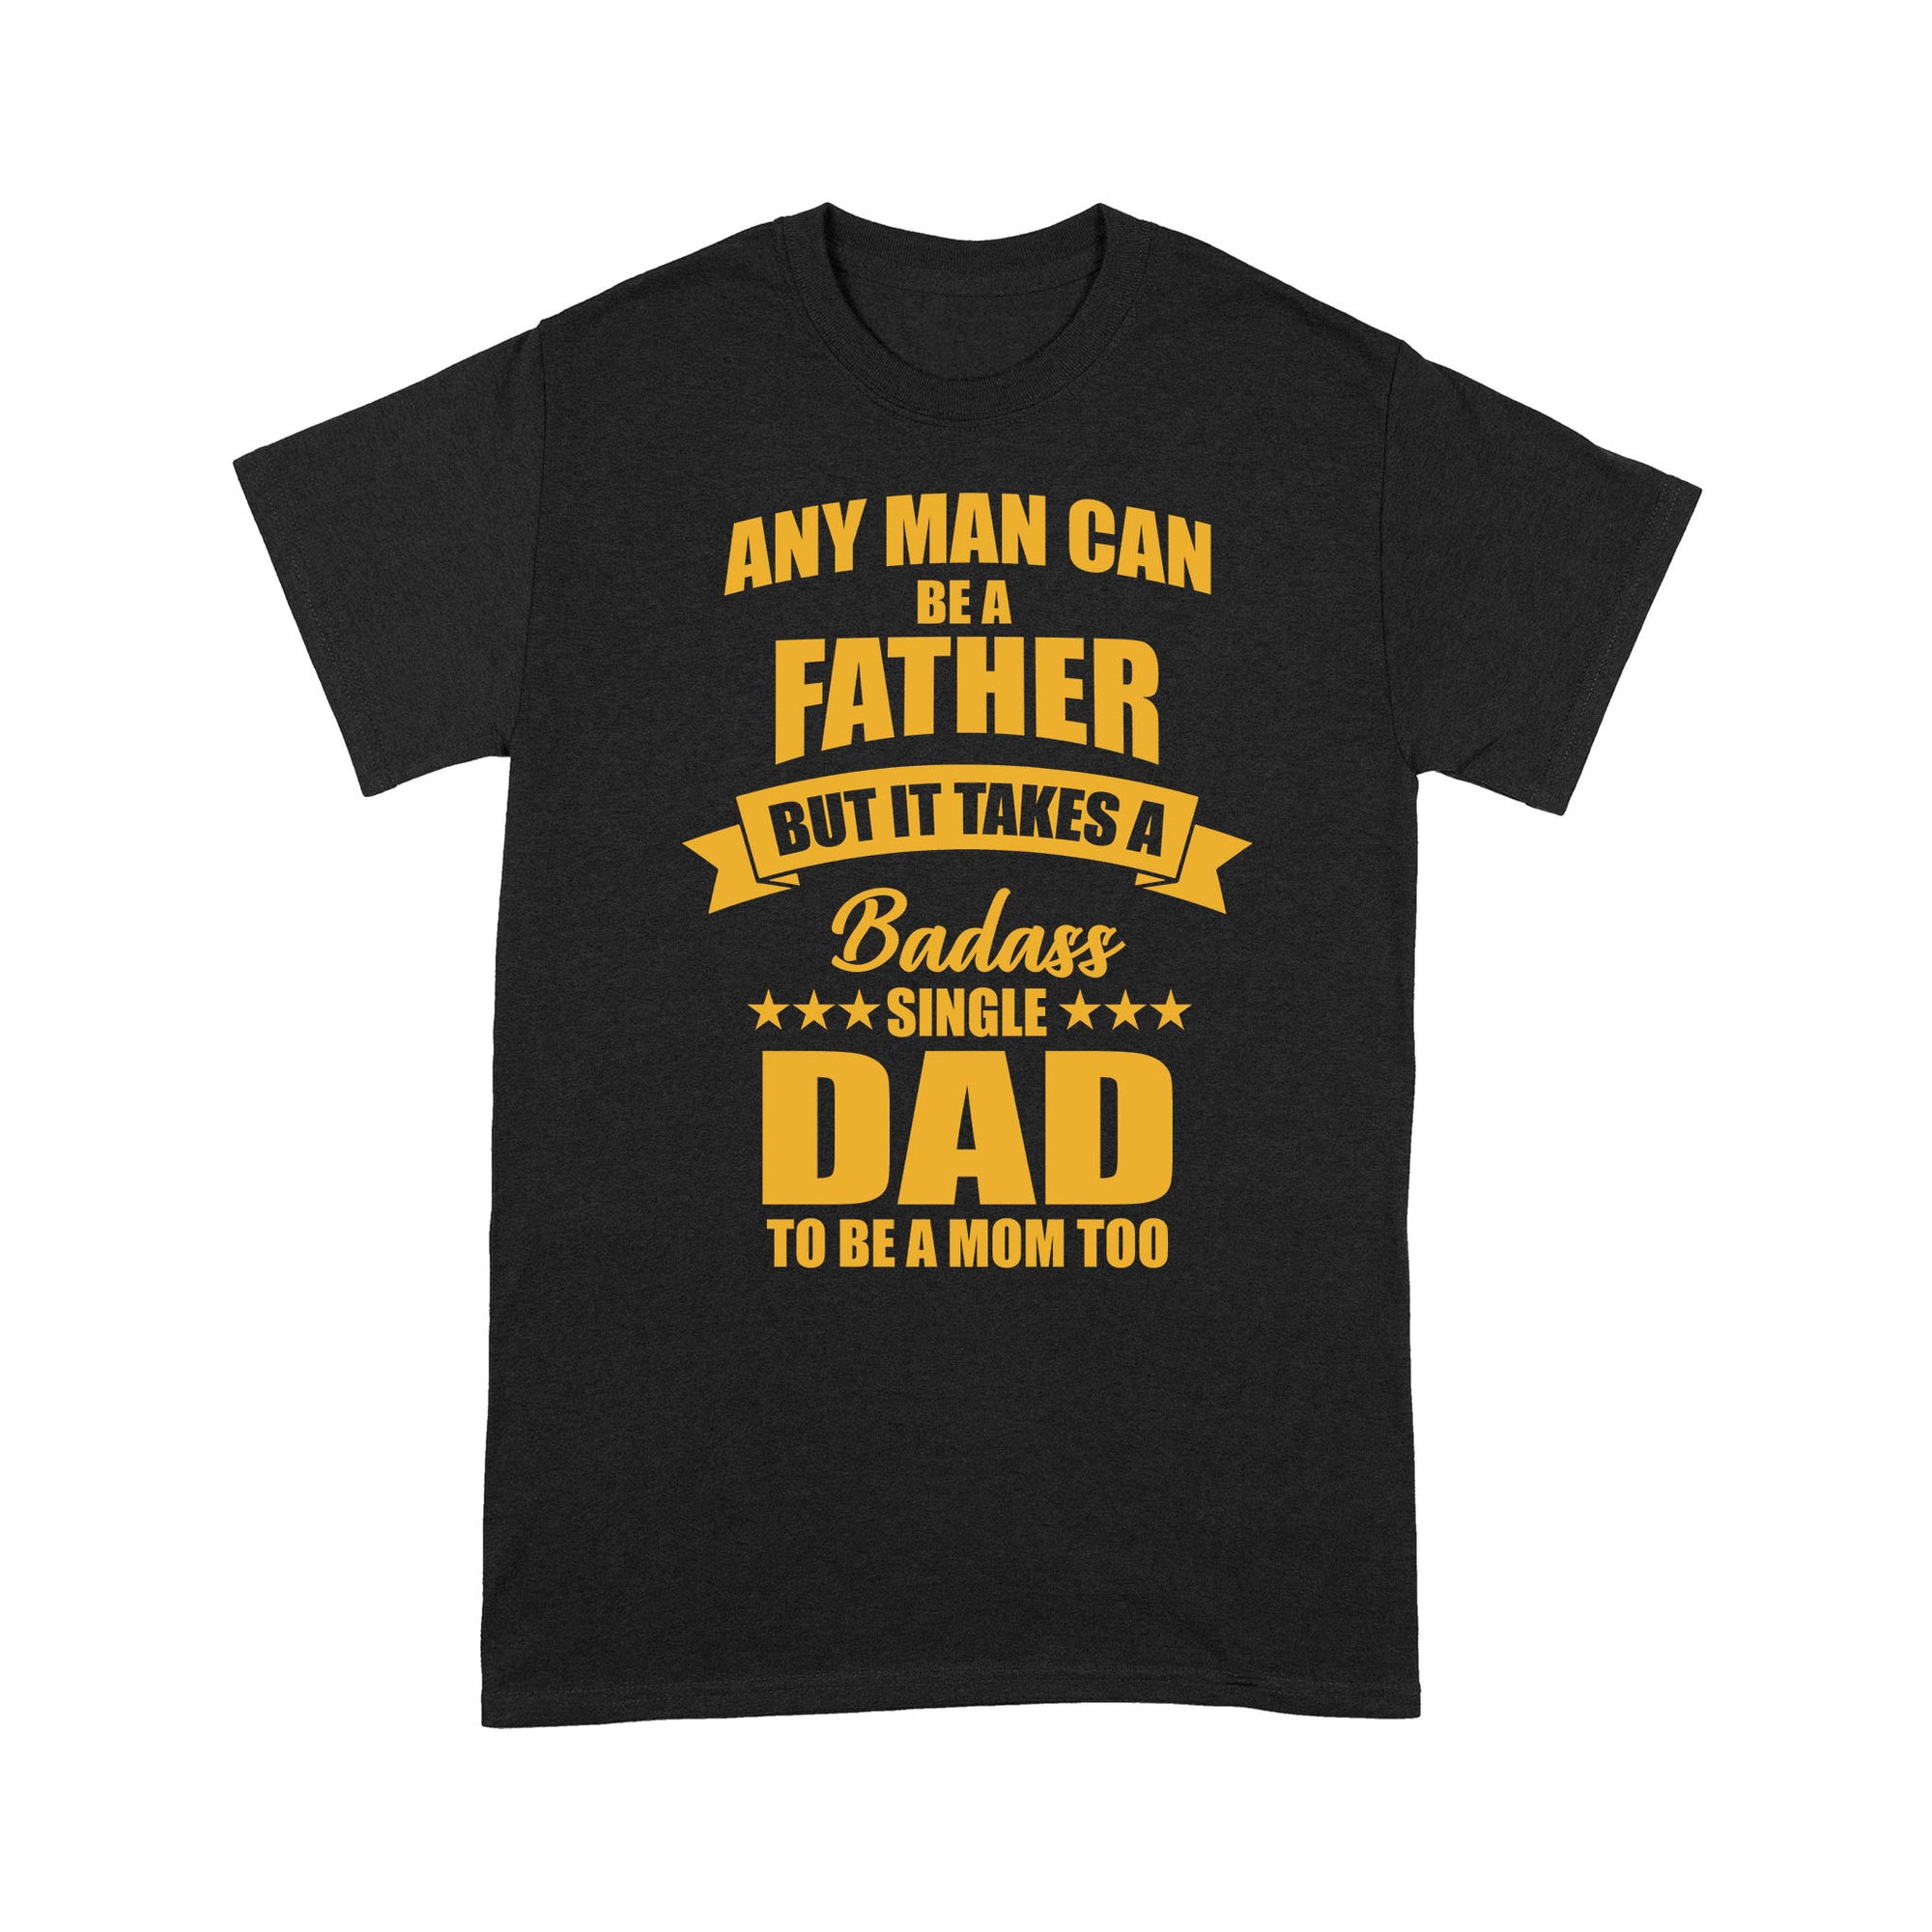 Any Man Can Be A Father But It Takes A Badass Single Dad To Be A Mom Too Gift for Single Dad Father - Standard T-shirt